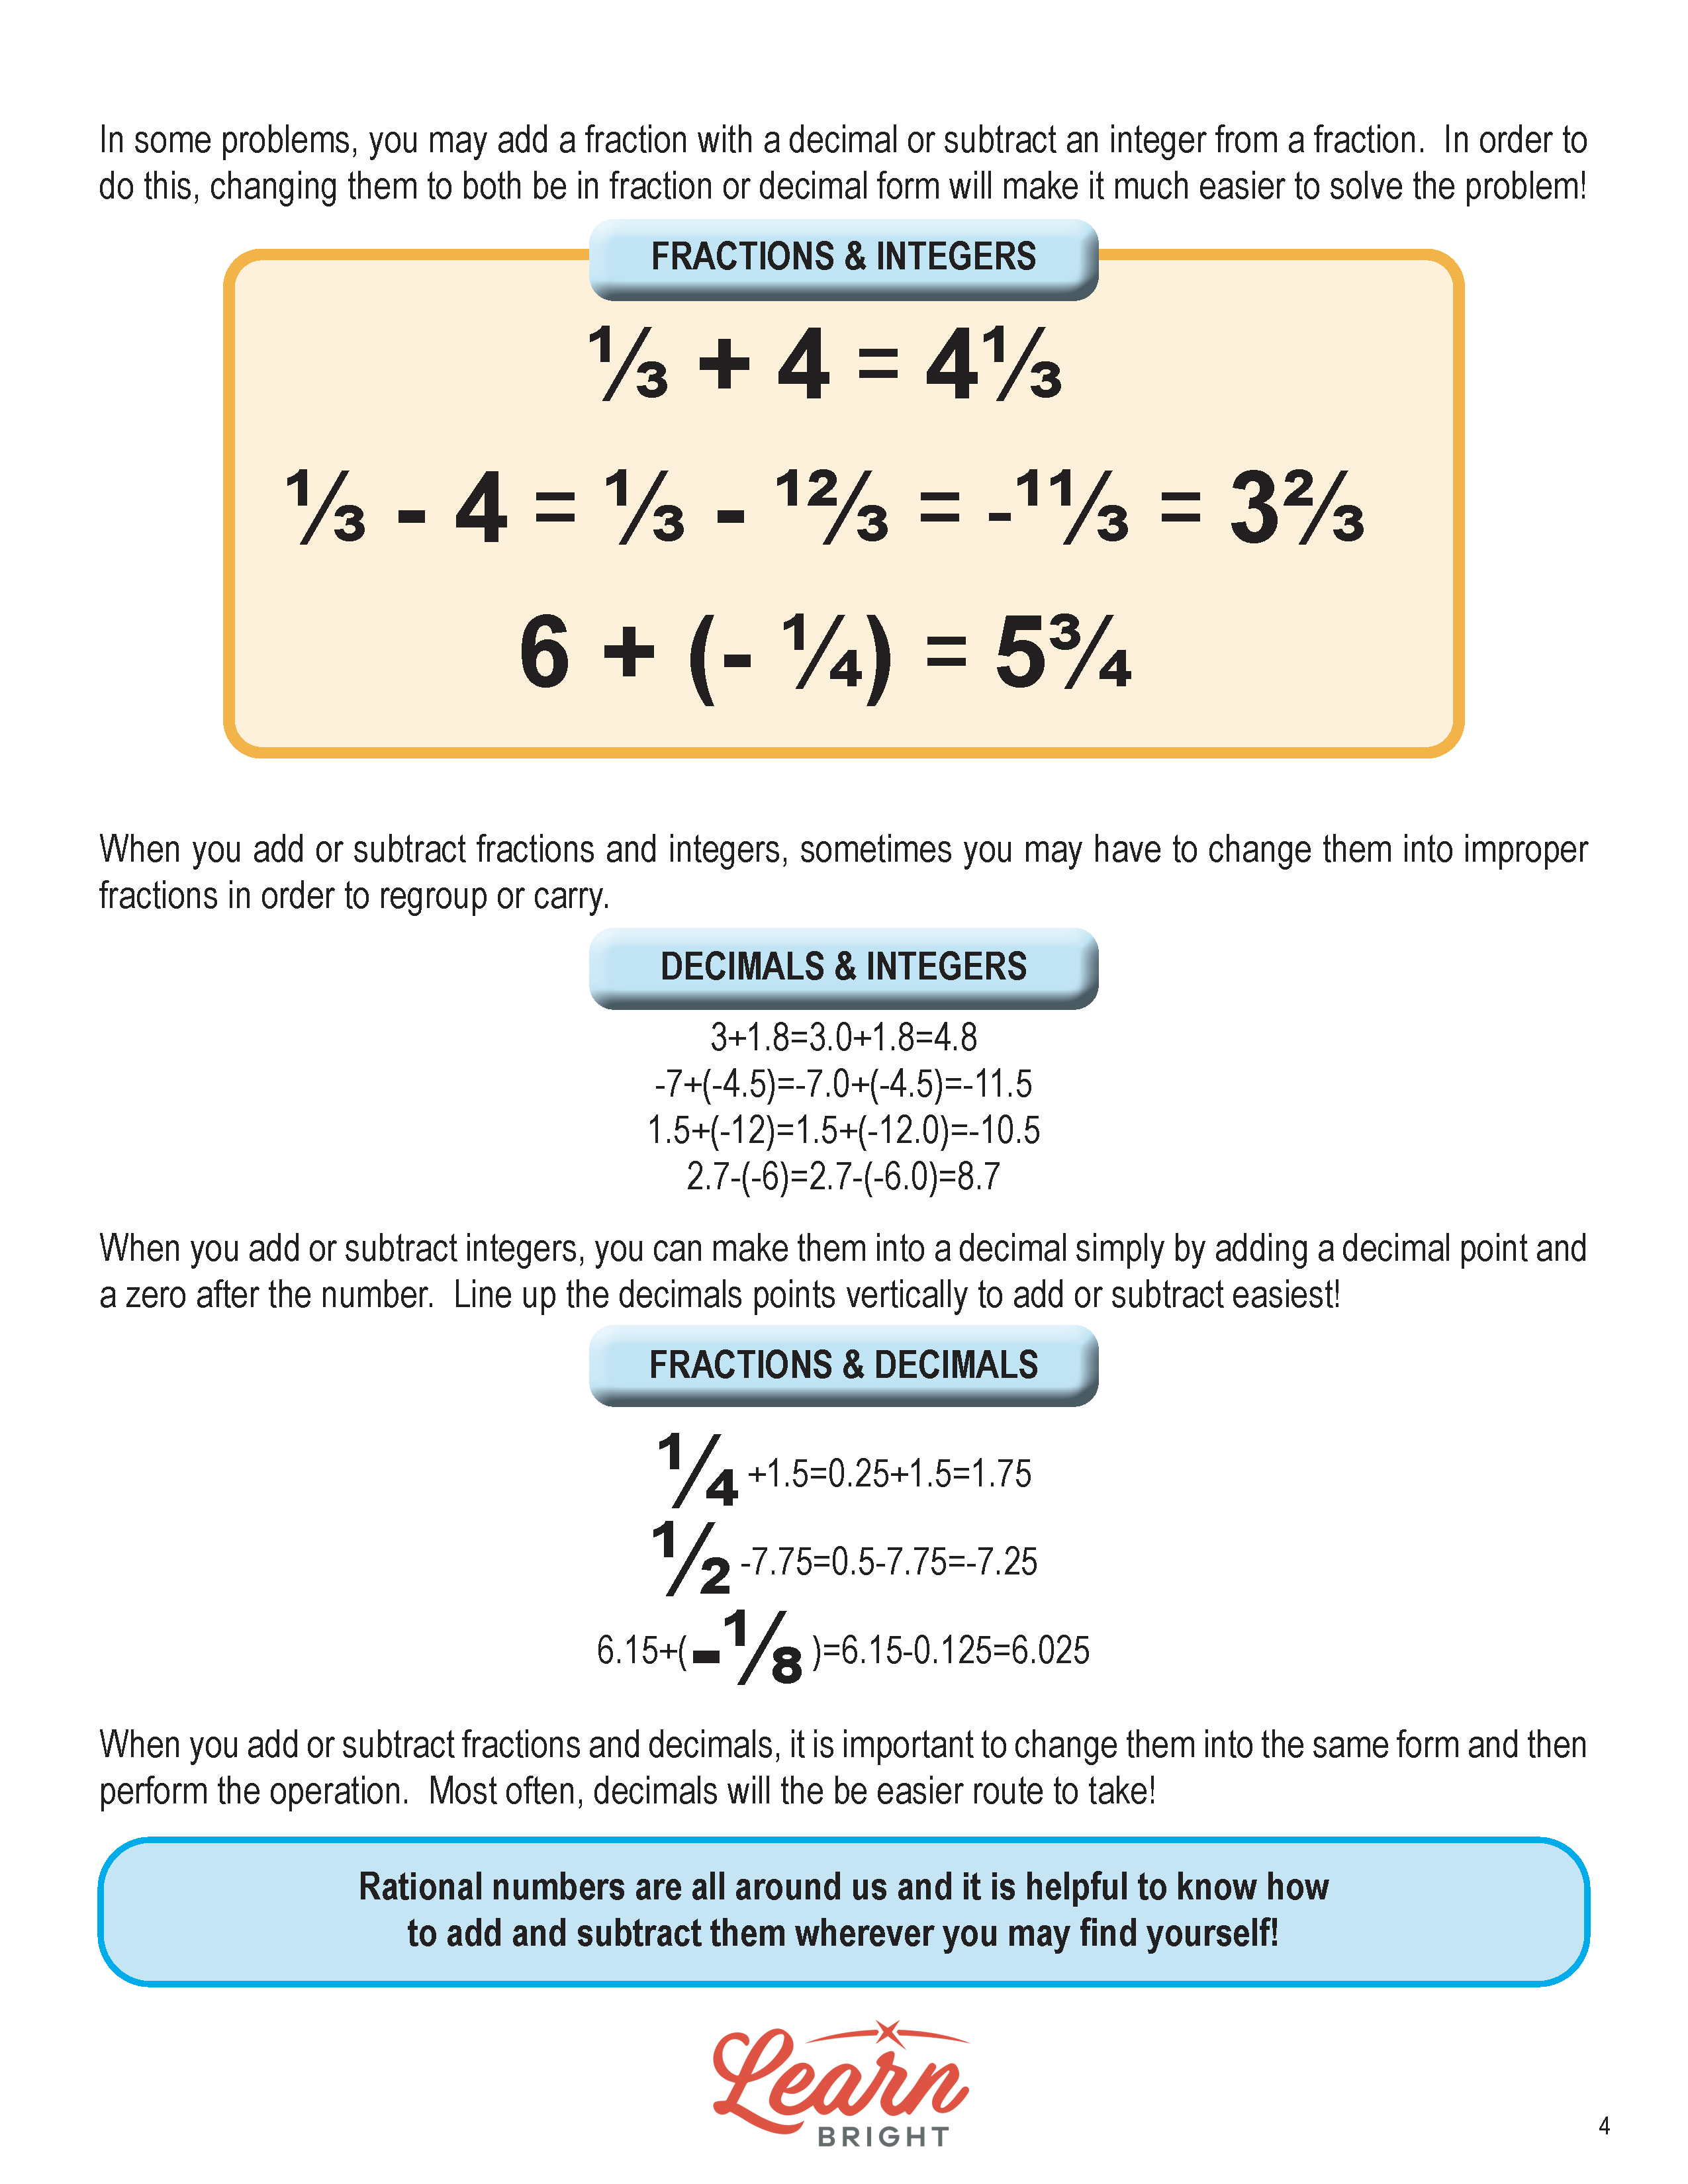 add-subtract-rational-numbers-free-pdf-download-learn-bright